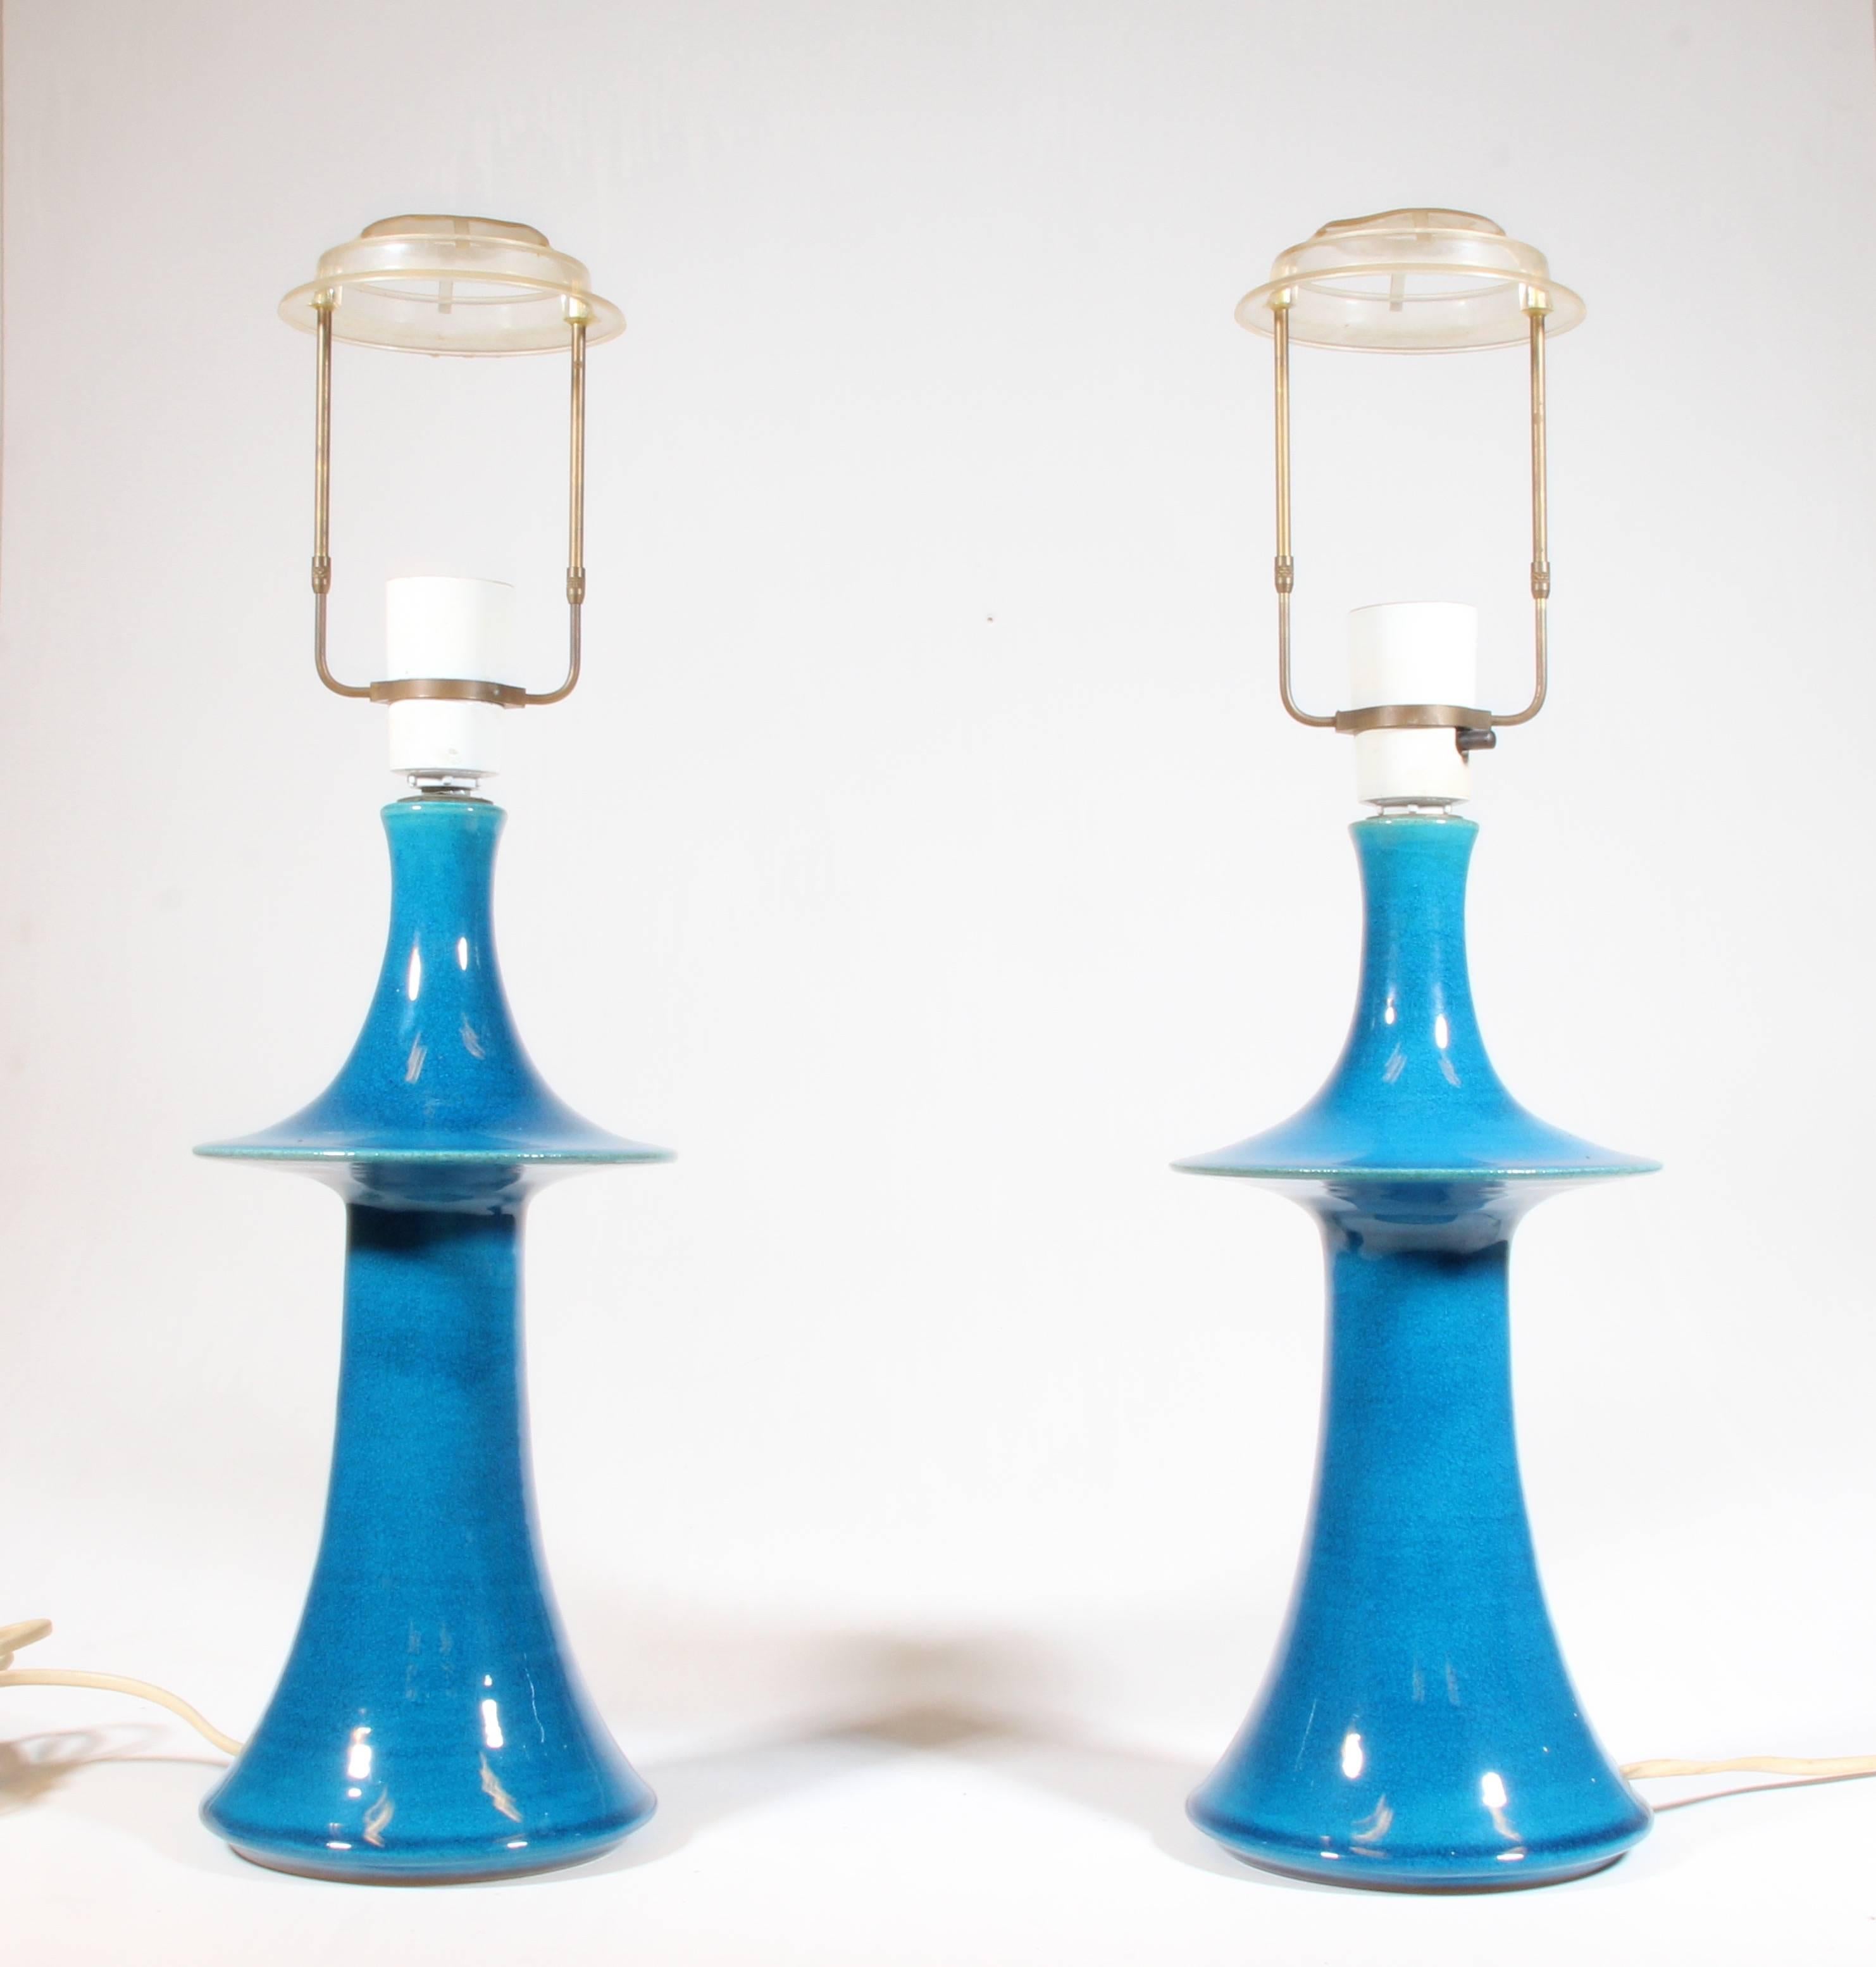 Pair of blue hand glazed ceramic tables lampes by Nils Kähler. Height of the pieces with holder 50 cm and without 32 cm. 